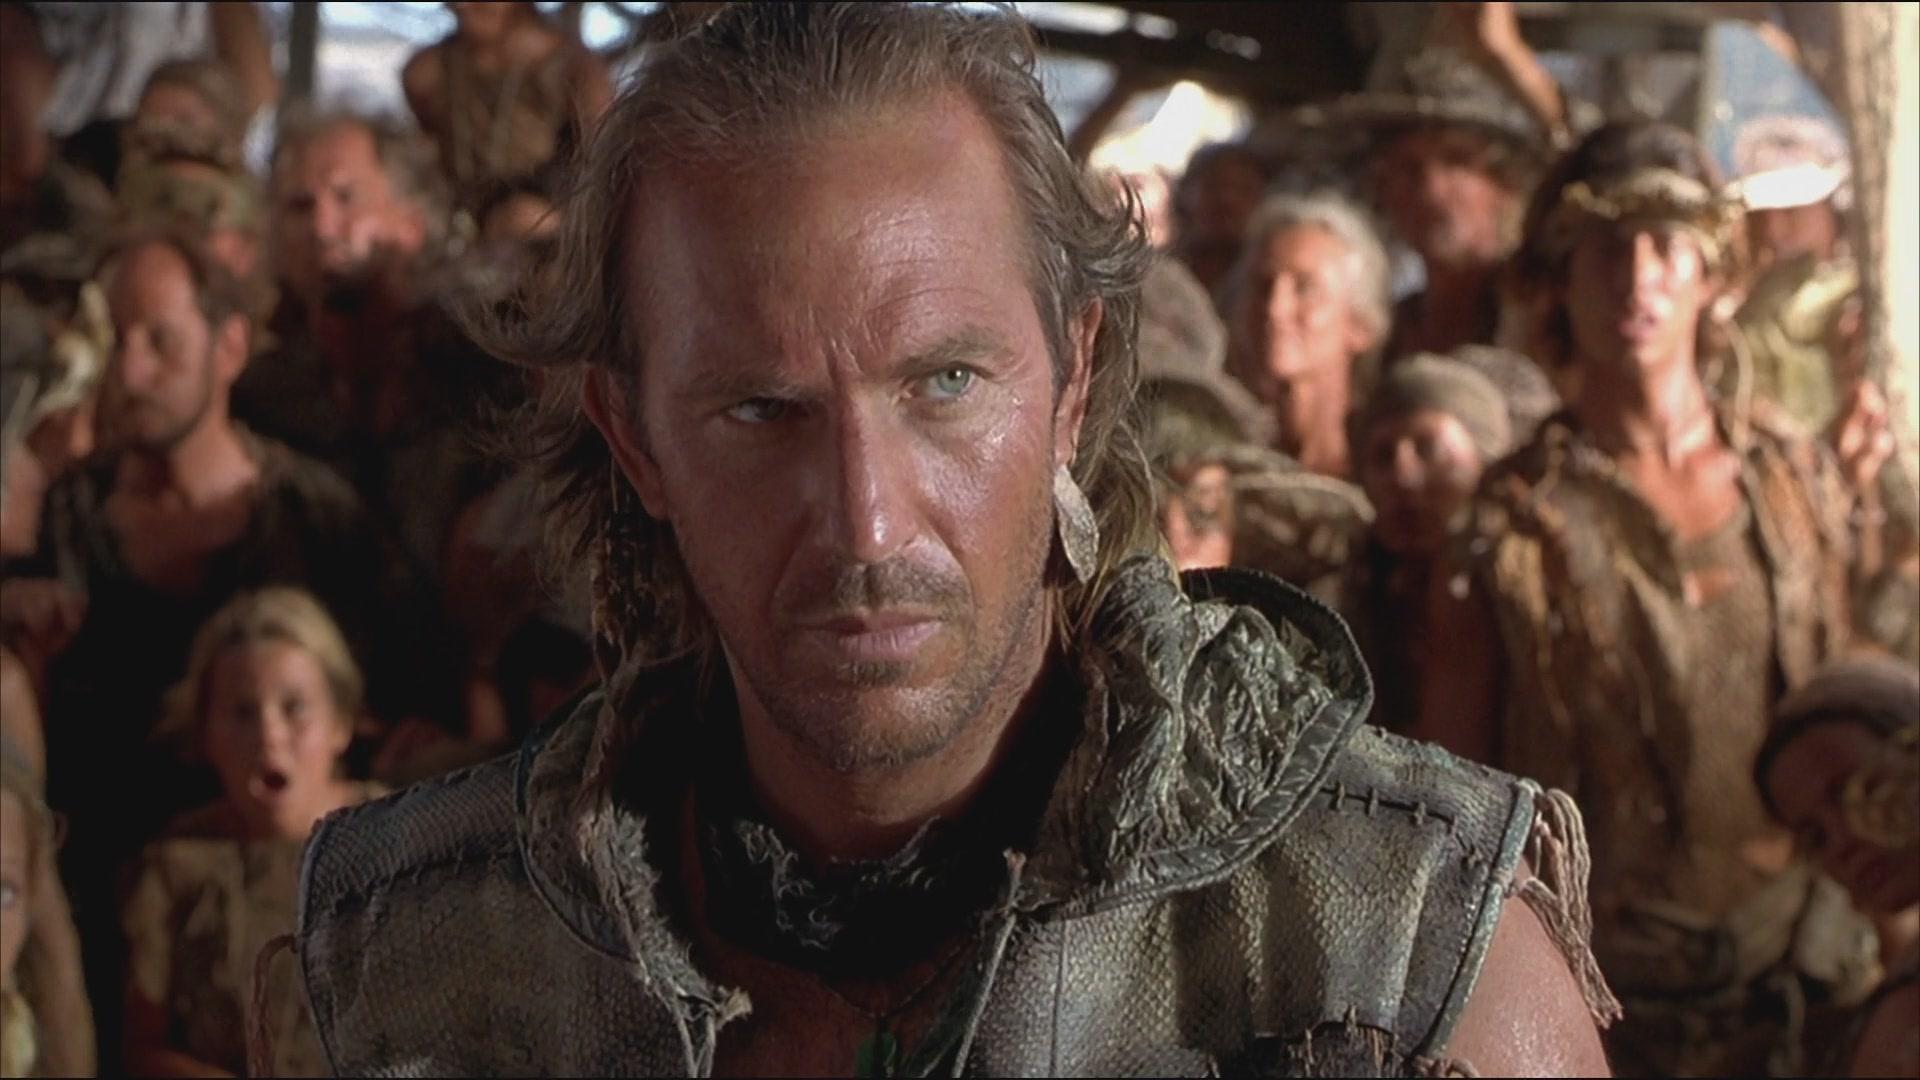 Excited to watch Waterworld (1995) on 4K Tonight. Limited Edition from  Arrow Comes With The Ulysses Cut. 🍿 : r/HD_MOVIE_SOURCE